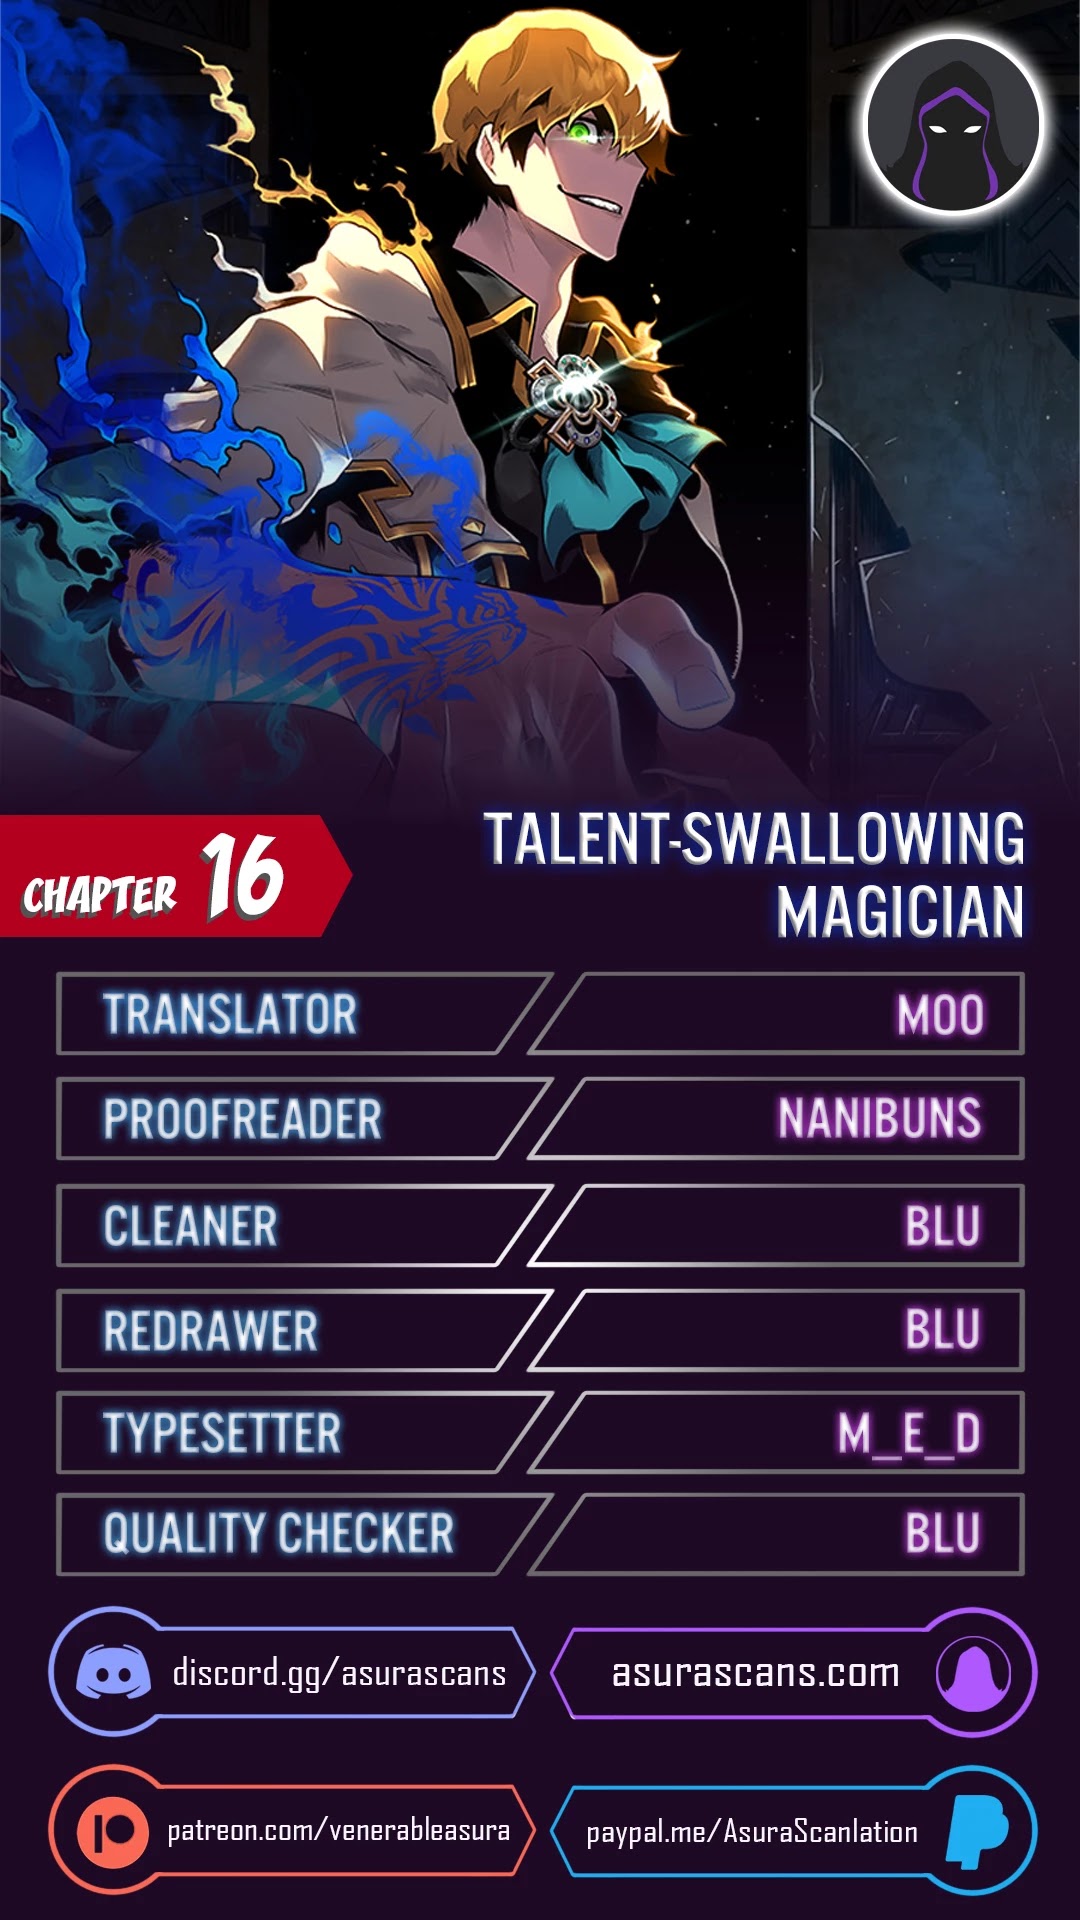 Talent-Swallowing Magician Chapter 16